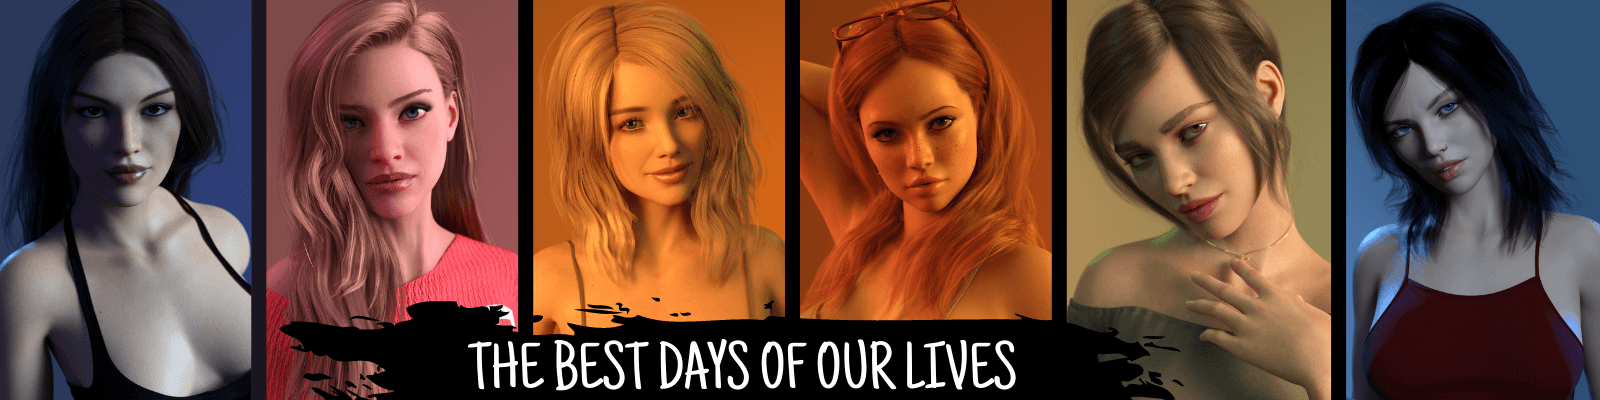 The Best Days of Our Lives [v0.1a]